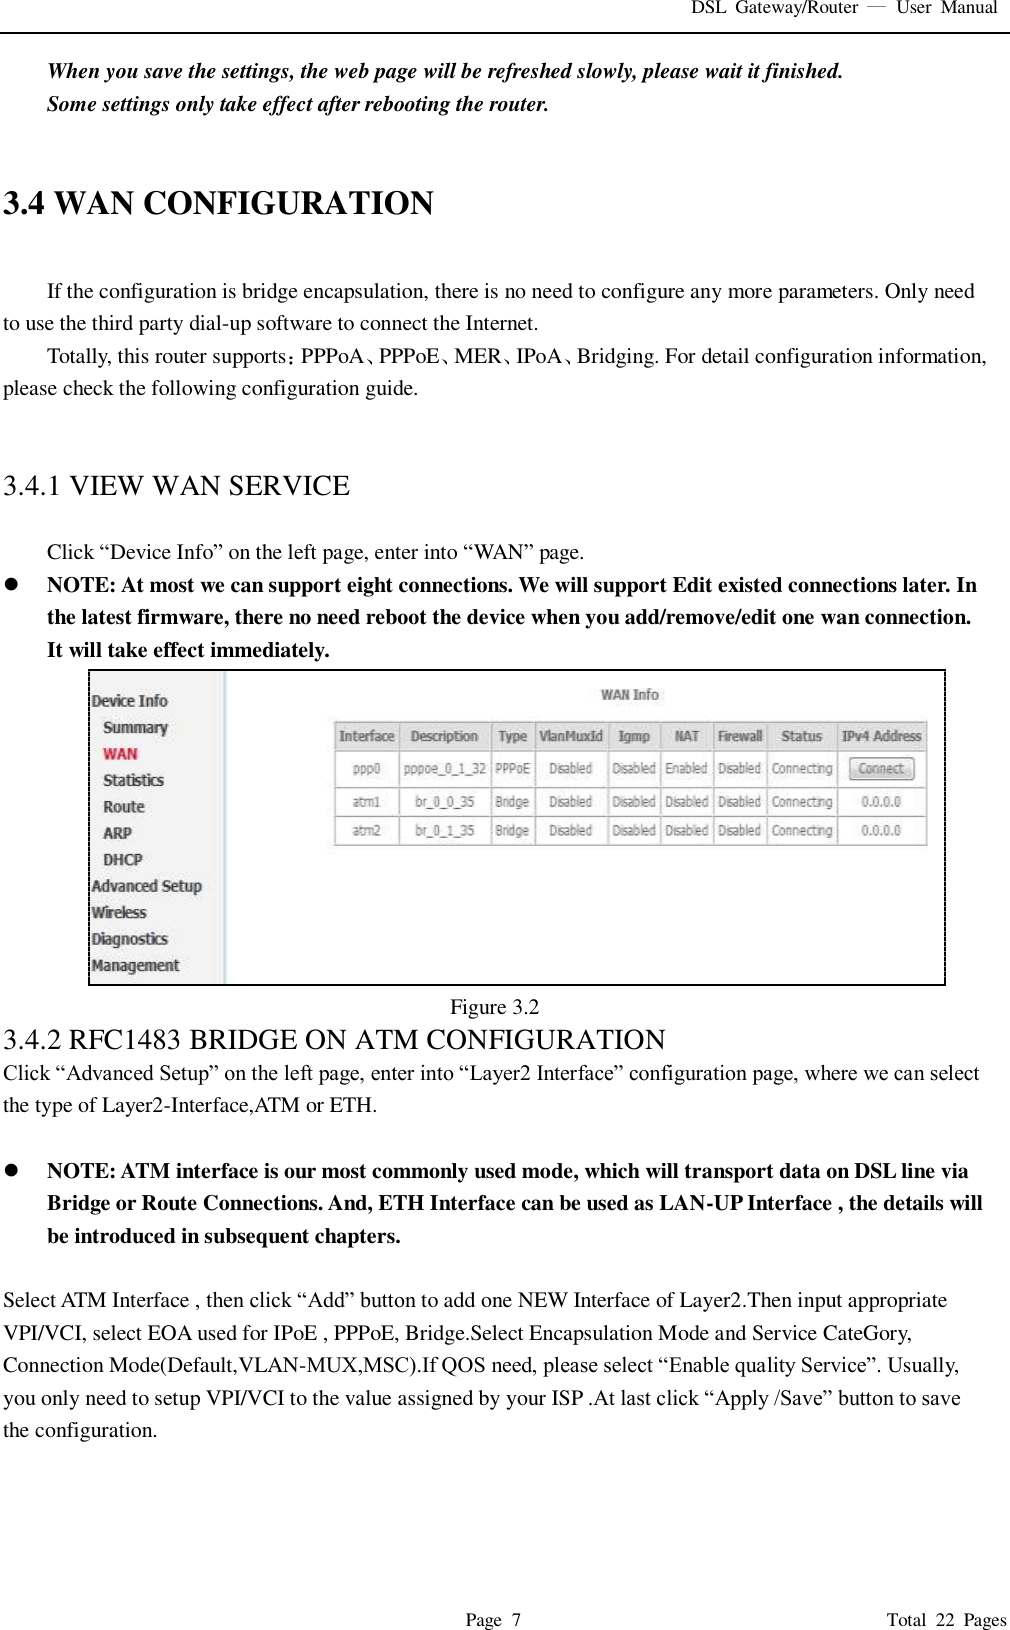 DSL  Gateway/Router    User  Manual   Page  7                                                                              Total  22  Pages When you save the settings, the web page will be refreshed slowly, please wait it finished. Some settings only take effect after rebooting the router.   3.4 WAN CONFIGURATION  If the configuration is bridge encapsulation, there is no need to configure any more parameters. Only need to use the third party dial-up software to connect the Internet.   Totally, this router supports PPPoA PPPoE MER IPoA Bridging. For detail configuration information, please check the following configuration guide.   3.4.1 VIEW WAN SERVICE    Click “Device Info” on the left page, enter into “WAN” page.  NOTE: At most we can support eight connections. We will support Edit existed connections later. In the latest firmware, there no need reboot the device when you add/remove/edit one wan connection. It will take effect immediately.  Figure 3.2 3.4.2 RFC1483 BRIDGE ON ATM CONFIGURATION   Click “Advanced Setup” on the left page, enter into “Layer2 Interface” configuration page, where we can select the type of Layer2-Interface,ATM or ETH.   NOTE: ATM interface is our most commonly used mode, which will transport data on DSL line via Bridge or Route Connections. And, ETH Interface can be used as LAN-UP Interface , the details will be introduced in subsequent chapters.  Select ATM Interface , then click “Add” button to add one NEW Interface of Layer2.Then input appropriate VPI/VCI, select EOA used for IPoE , PPPoE, Bridge.Select Encapsulation Mode and Service CateGory, Connection Mode(Default,VLAN-MUX,MSC).If QOS need, please select “Enable quality Service”. Usually, you only need to setup VPI/VCI to the value assigned by your ISP .At last click “Apply /Save” button to save the configuration. 